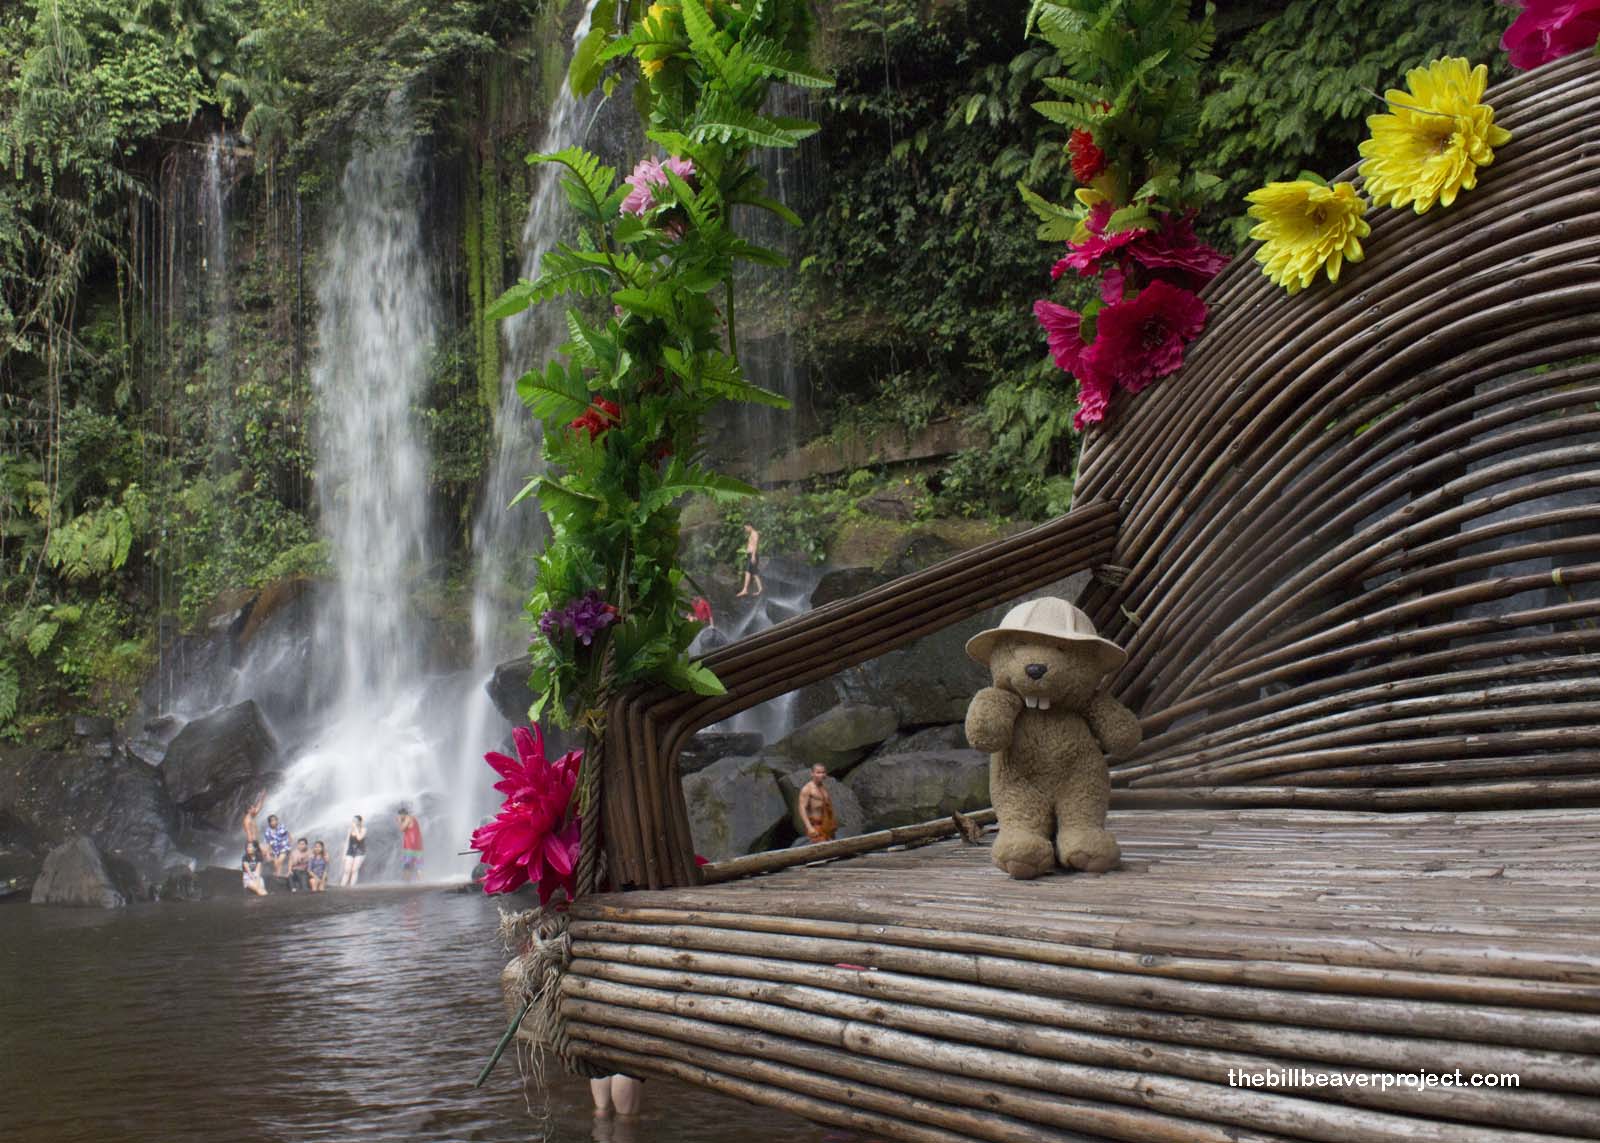 The Kulen waterfall sure was popular today!